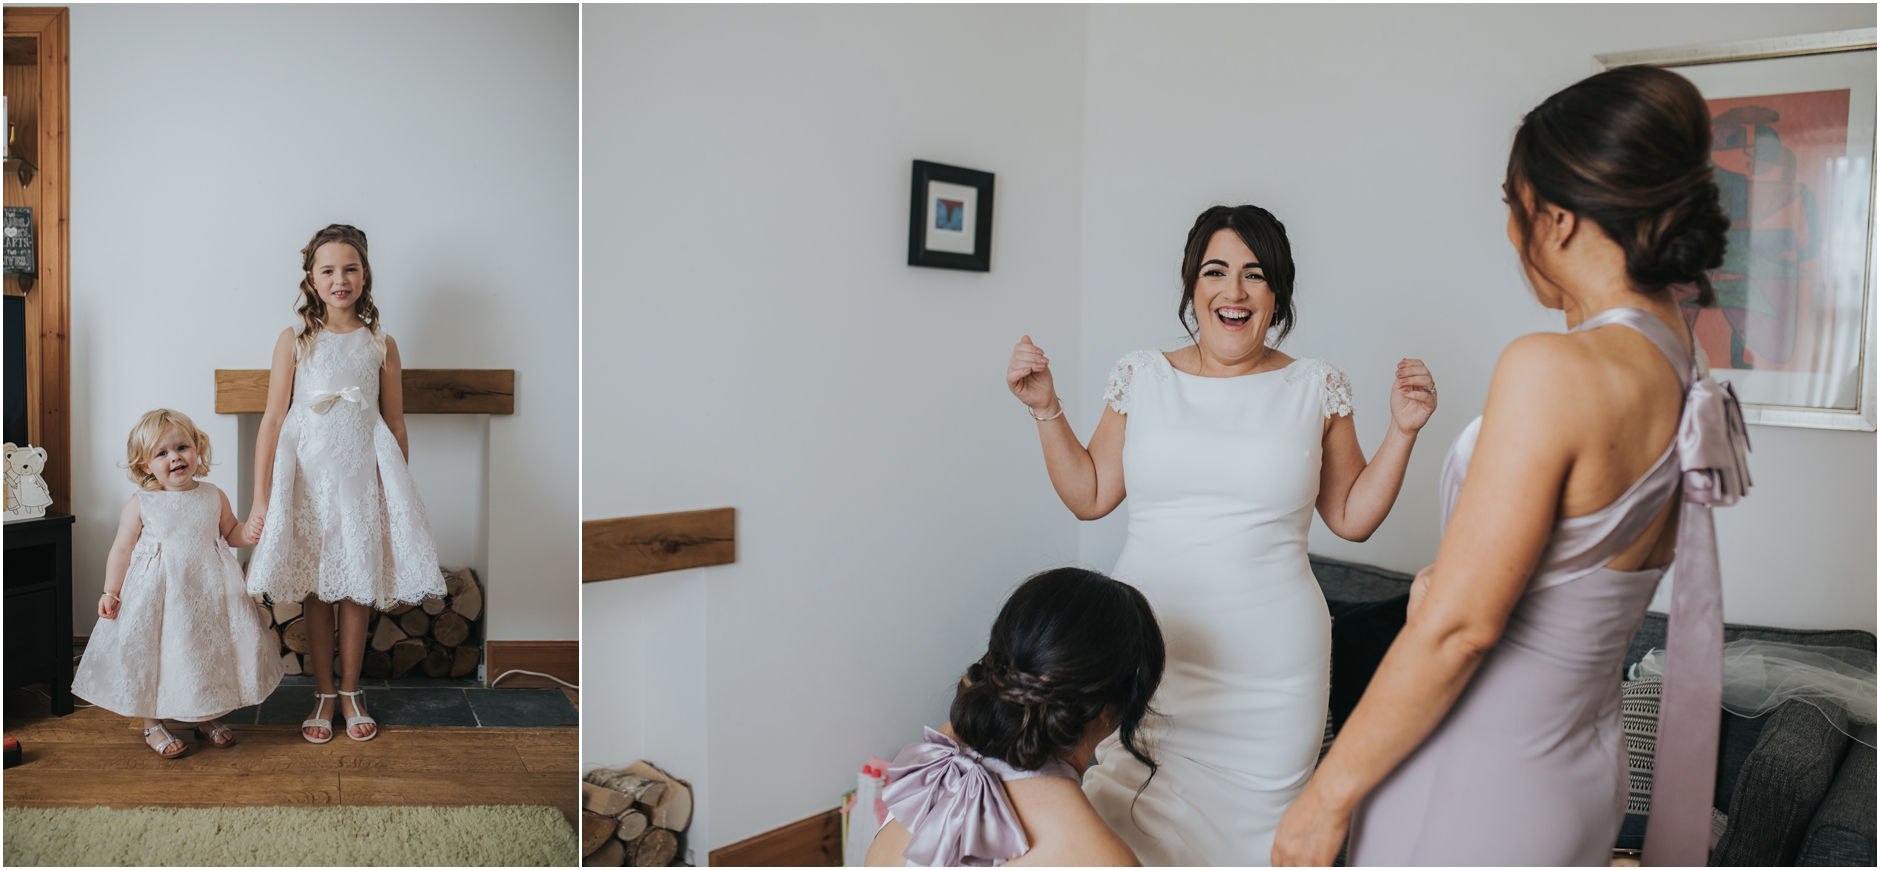 photos of flowergirls on wedding day and bride laughing whilst bridesmaids put on her garter.